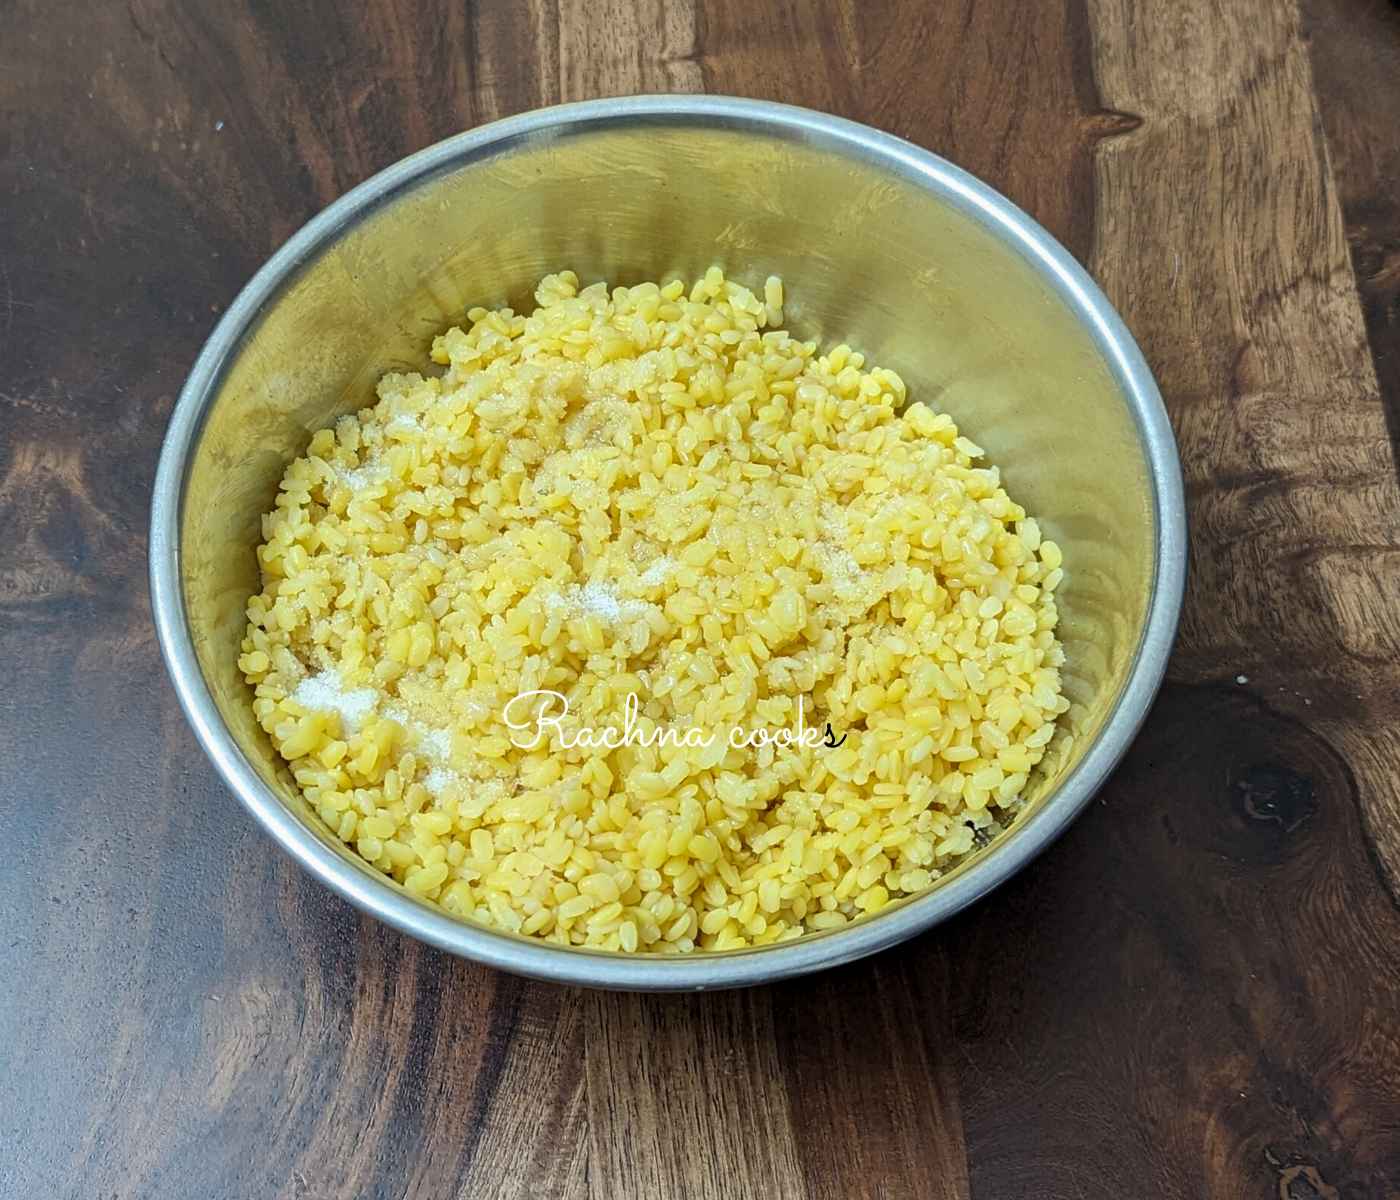 Parboiled and dried moong dal mixed with salt and oil